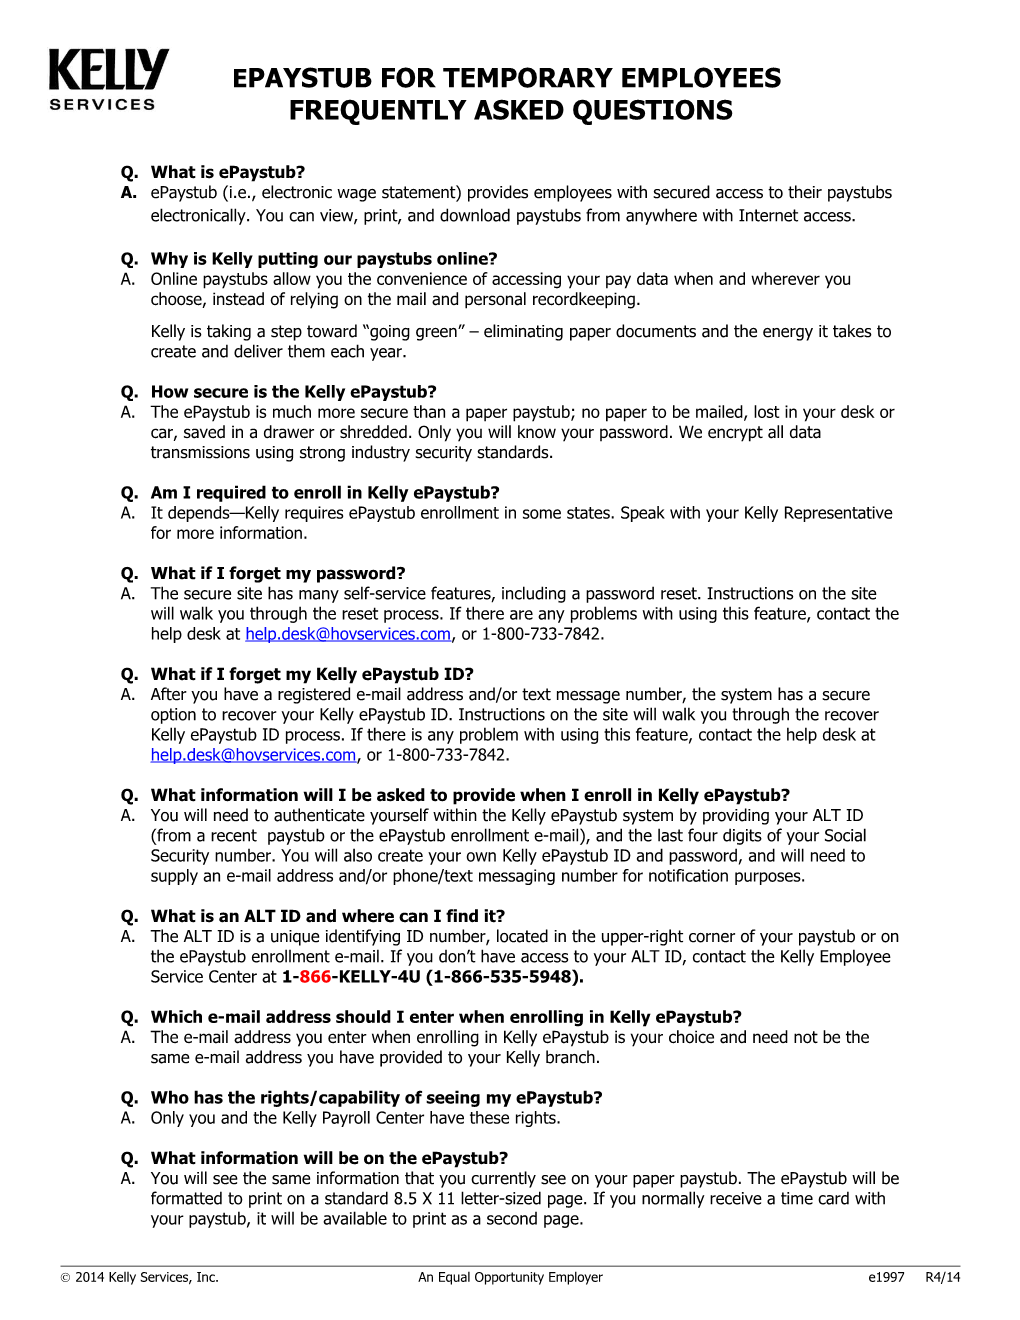 Epaystubs for Temporary Employees Frequently Asked Questions (E1997)